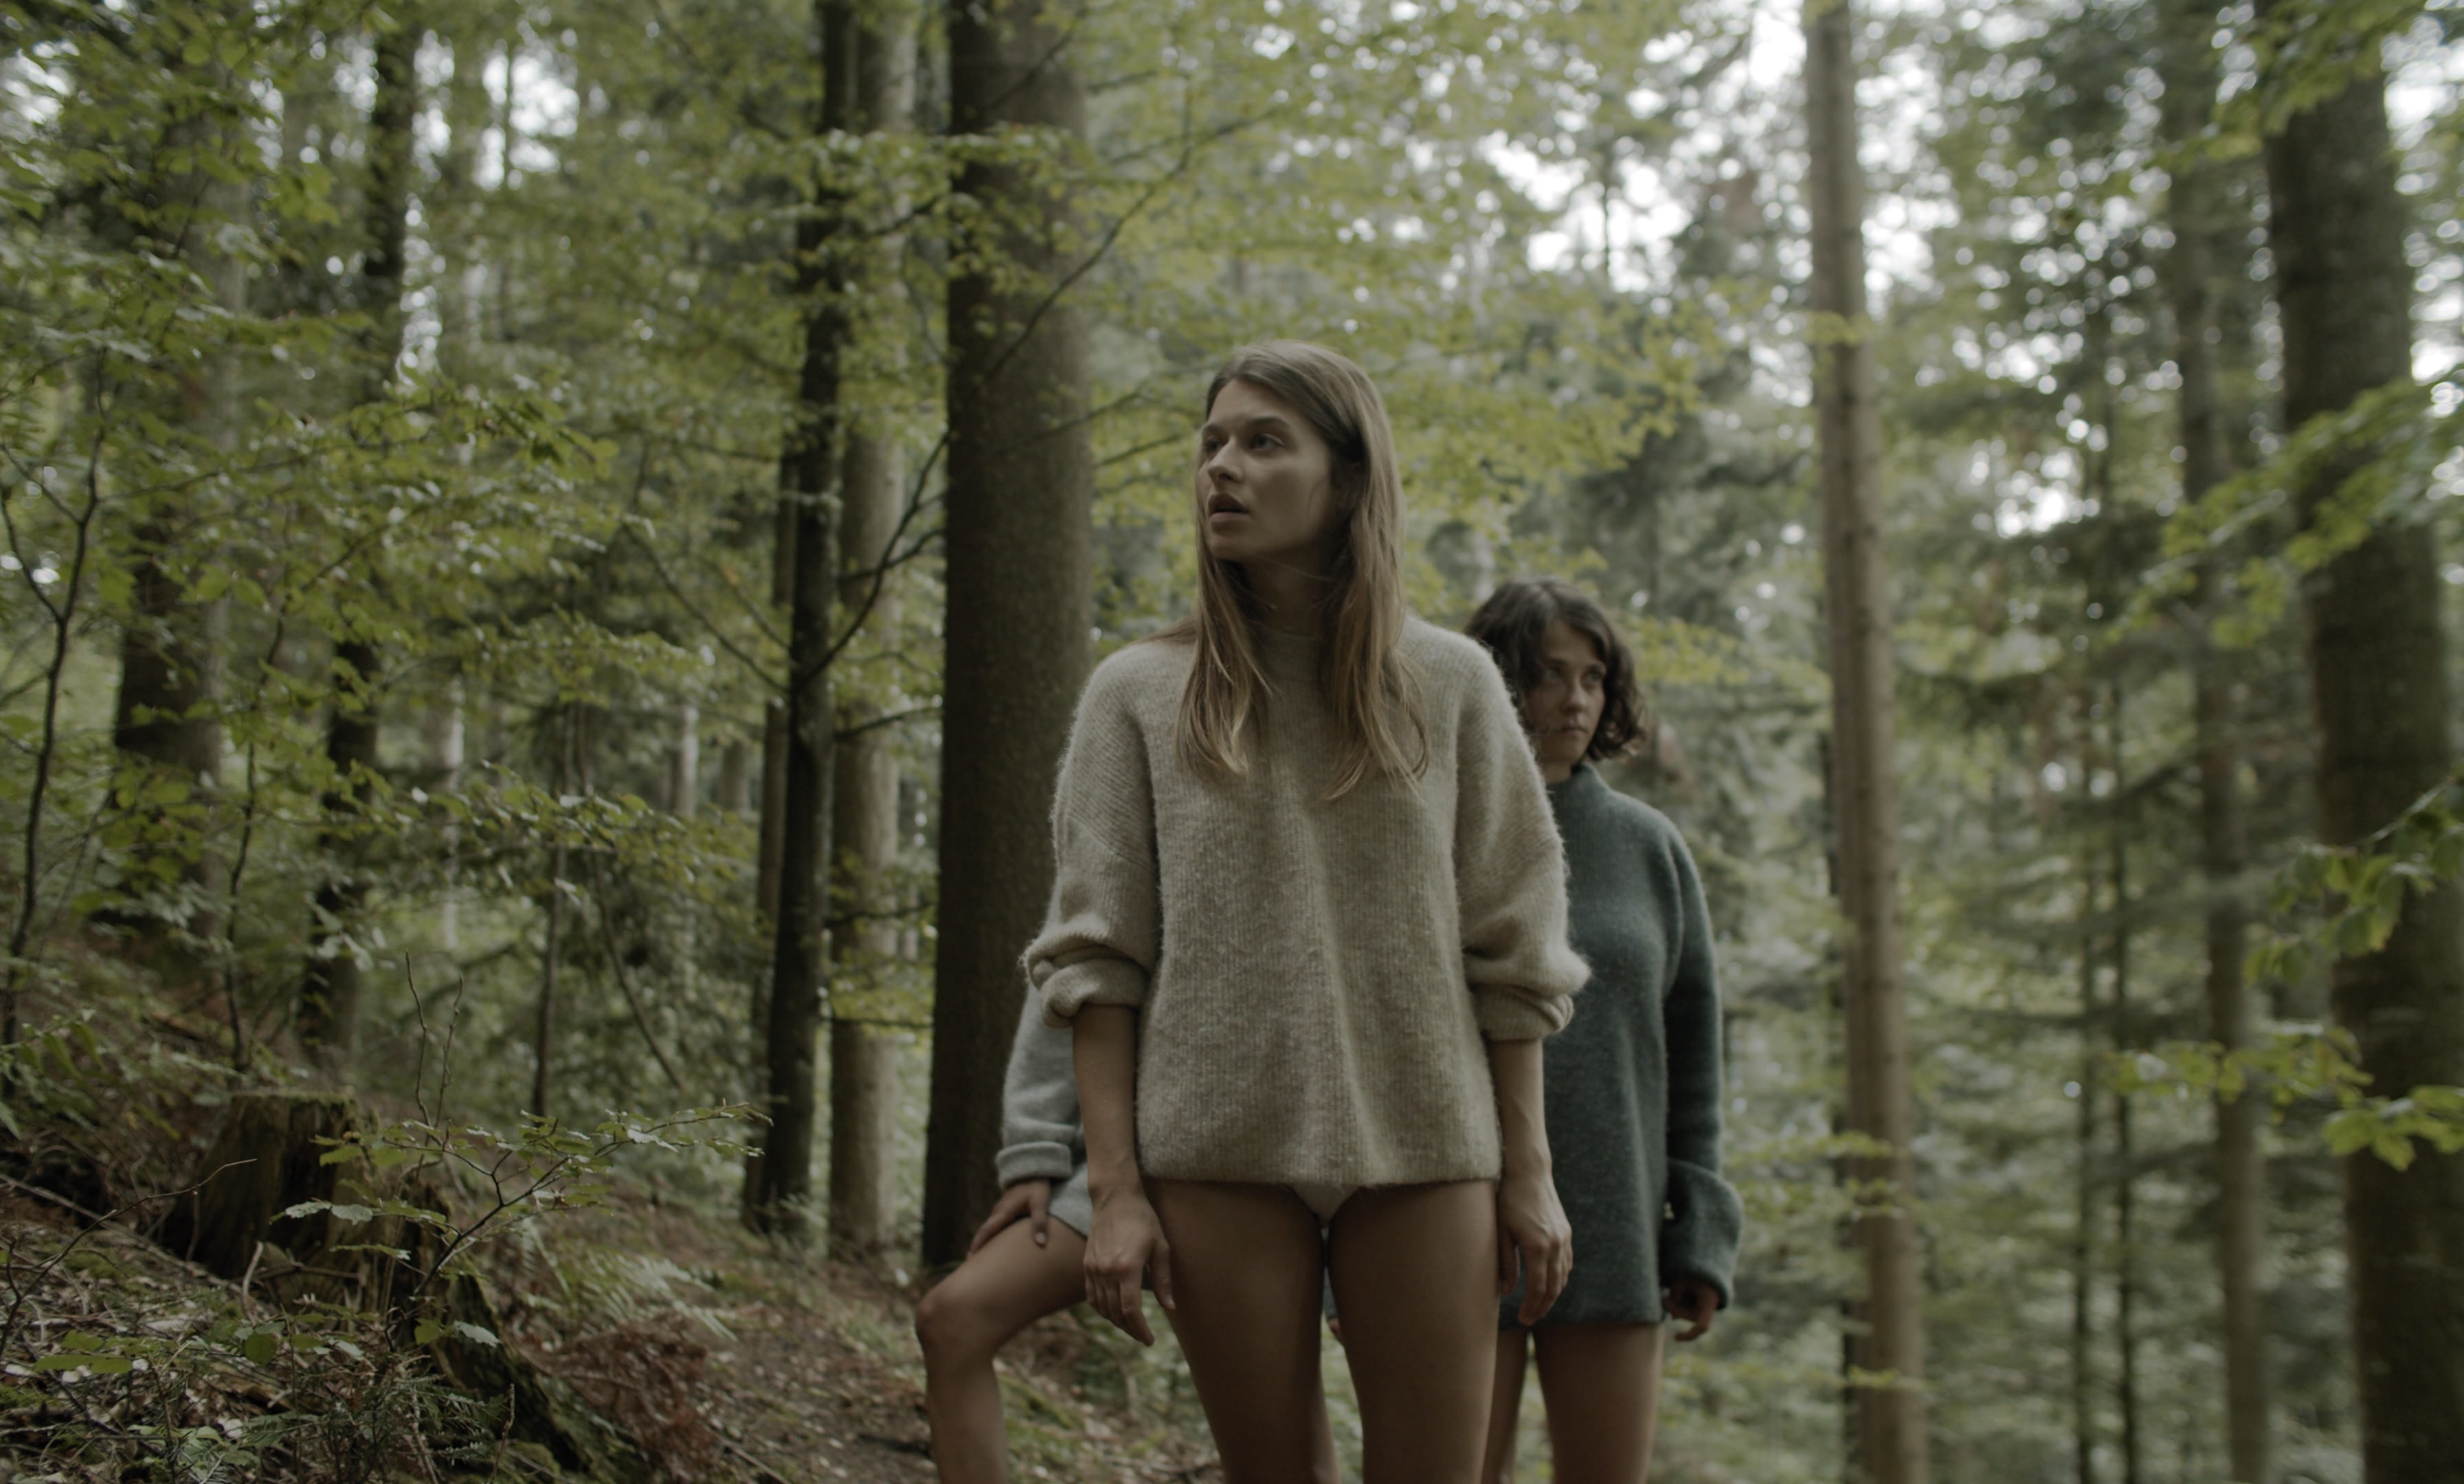 Three women with bare legs standing in a forest, looking around and searching. 